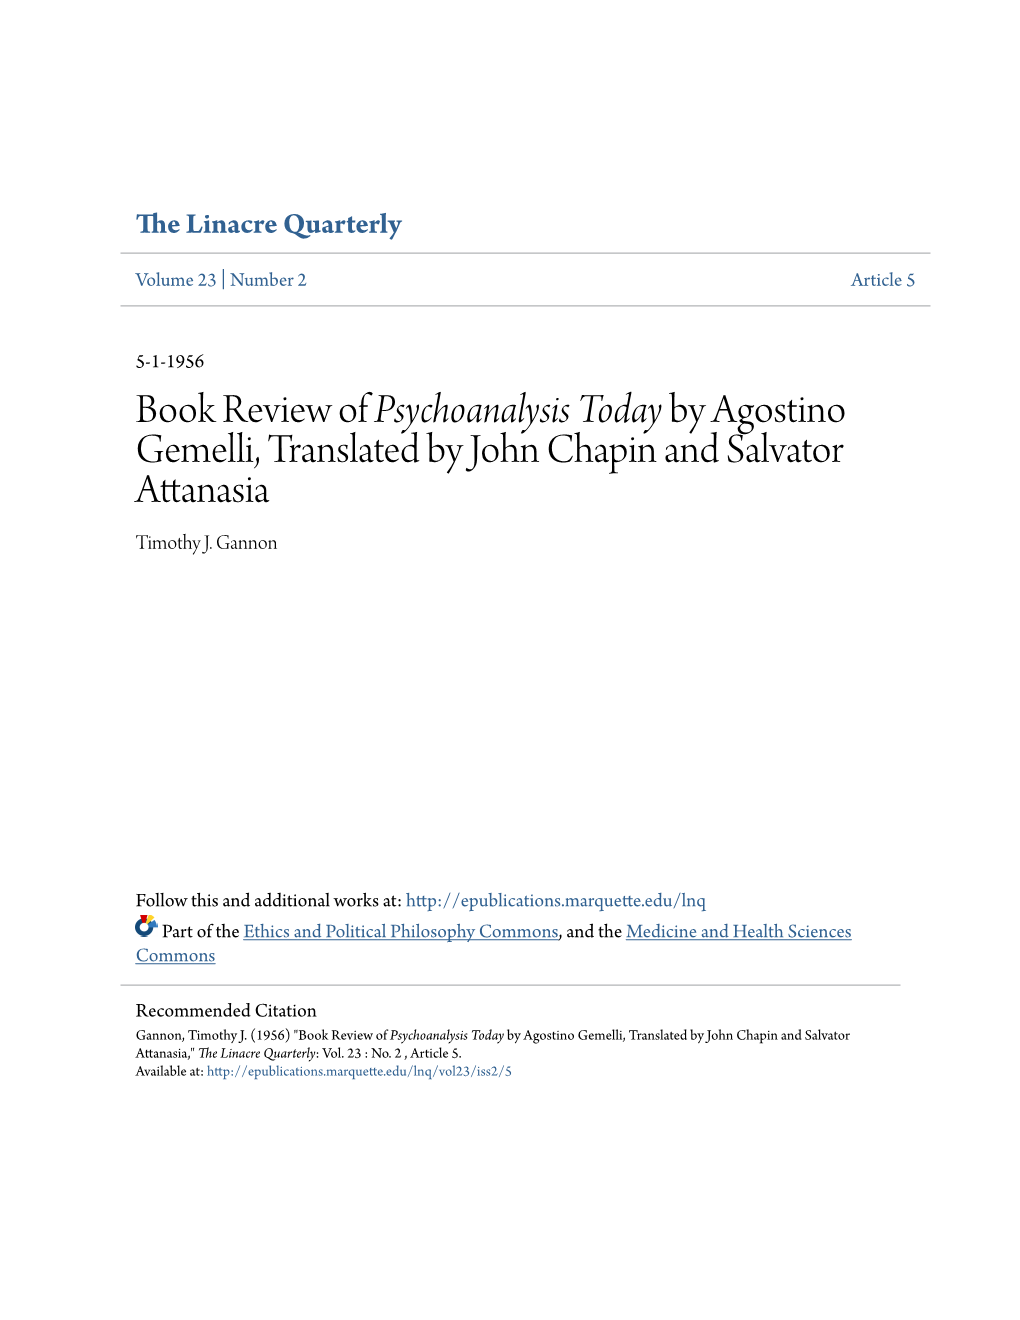 Book Review of Psychoanalysis Today by Agostino Gemelli, Translated by John Chapin and Salvator Attanasia Timothy J